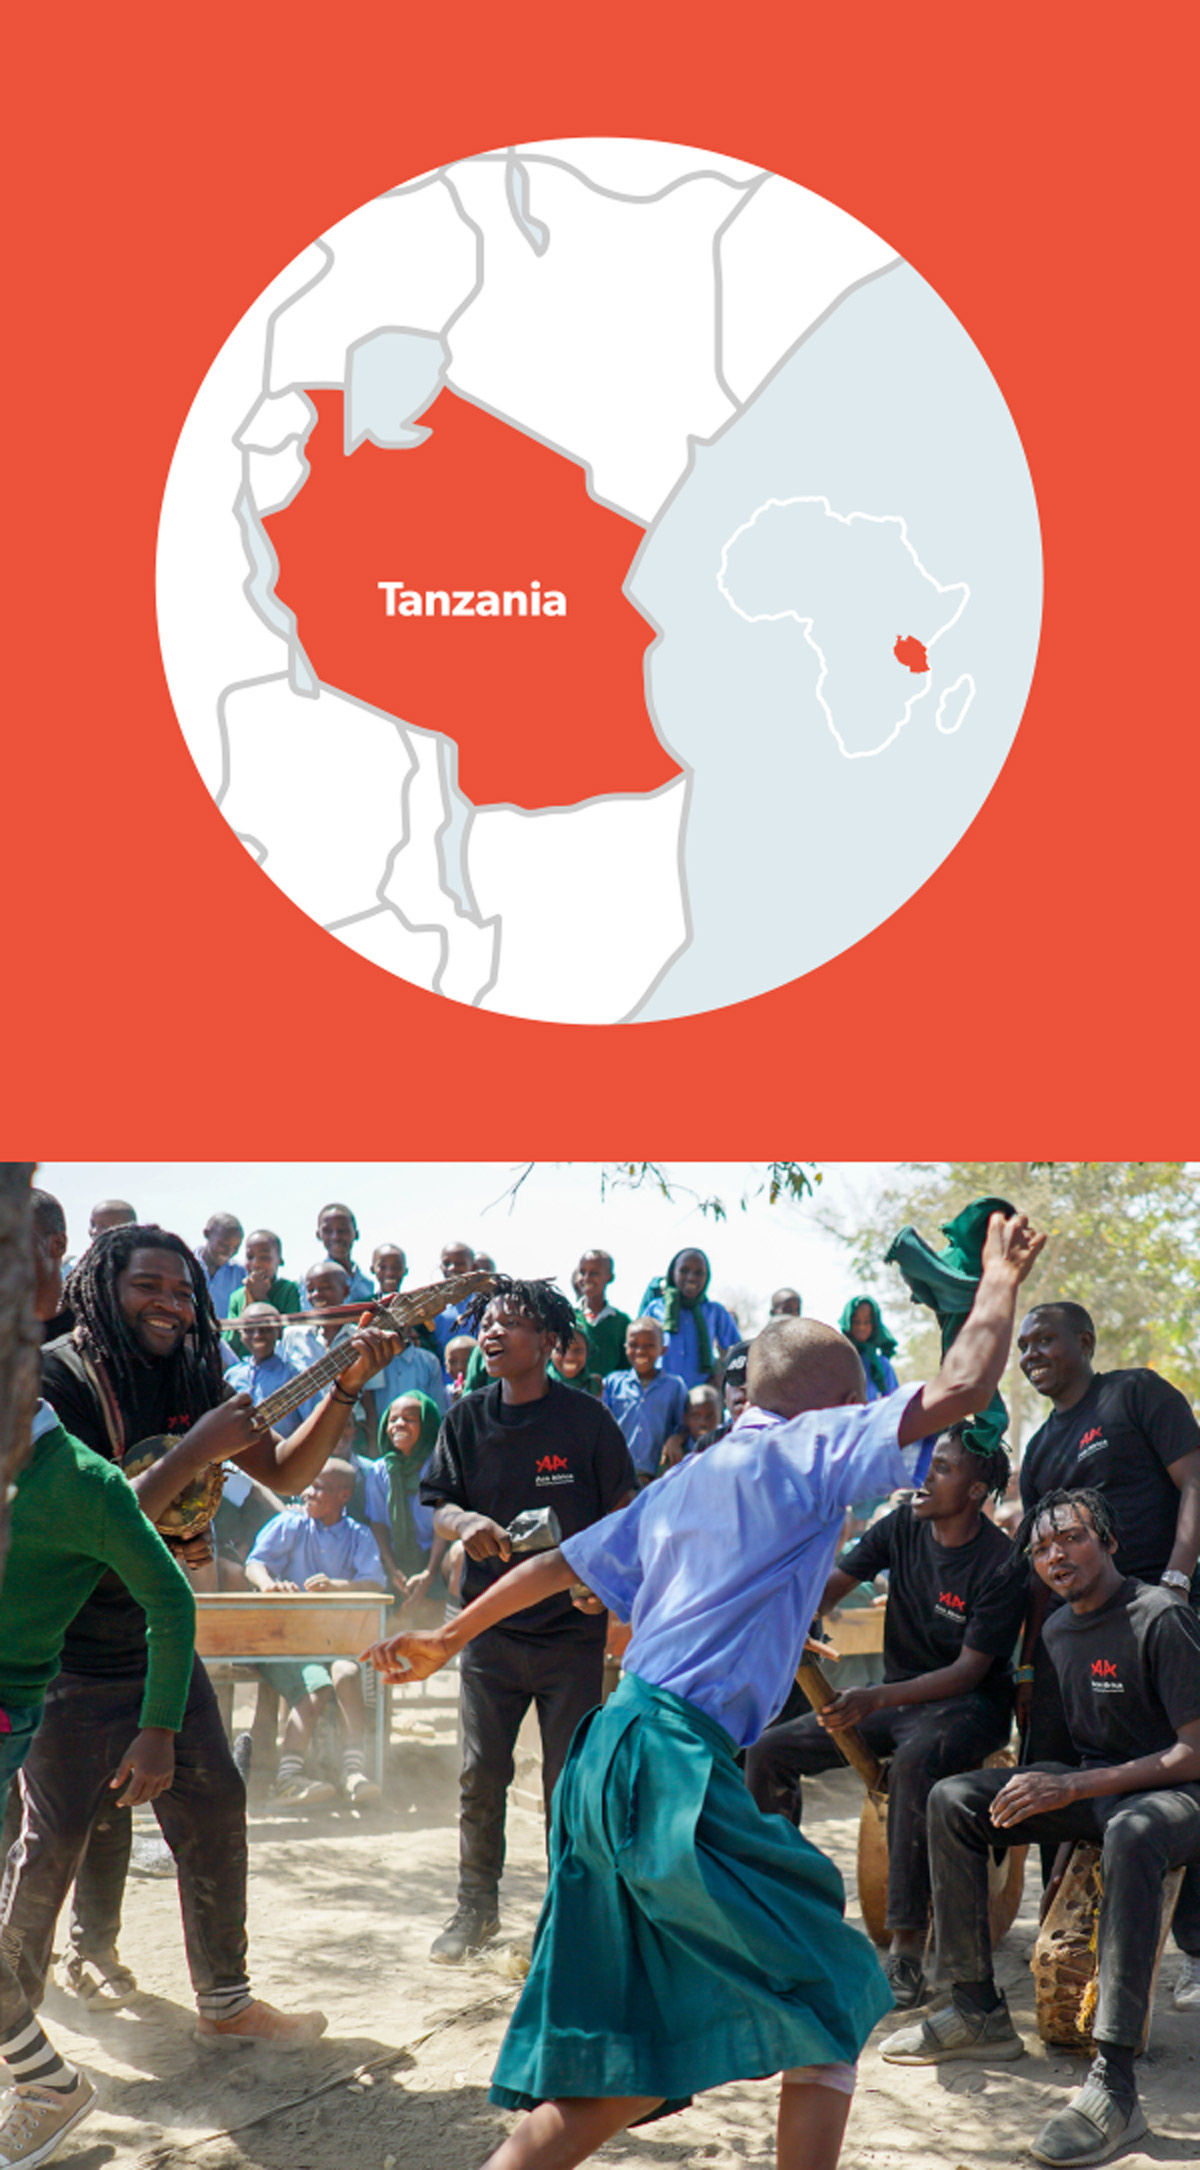 partner-tanzania-mobile-images